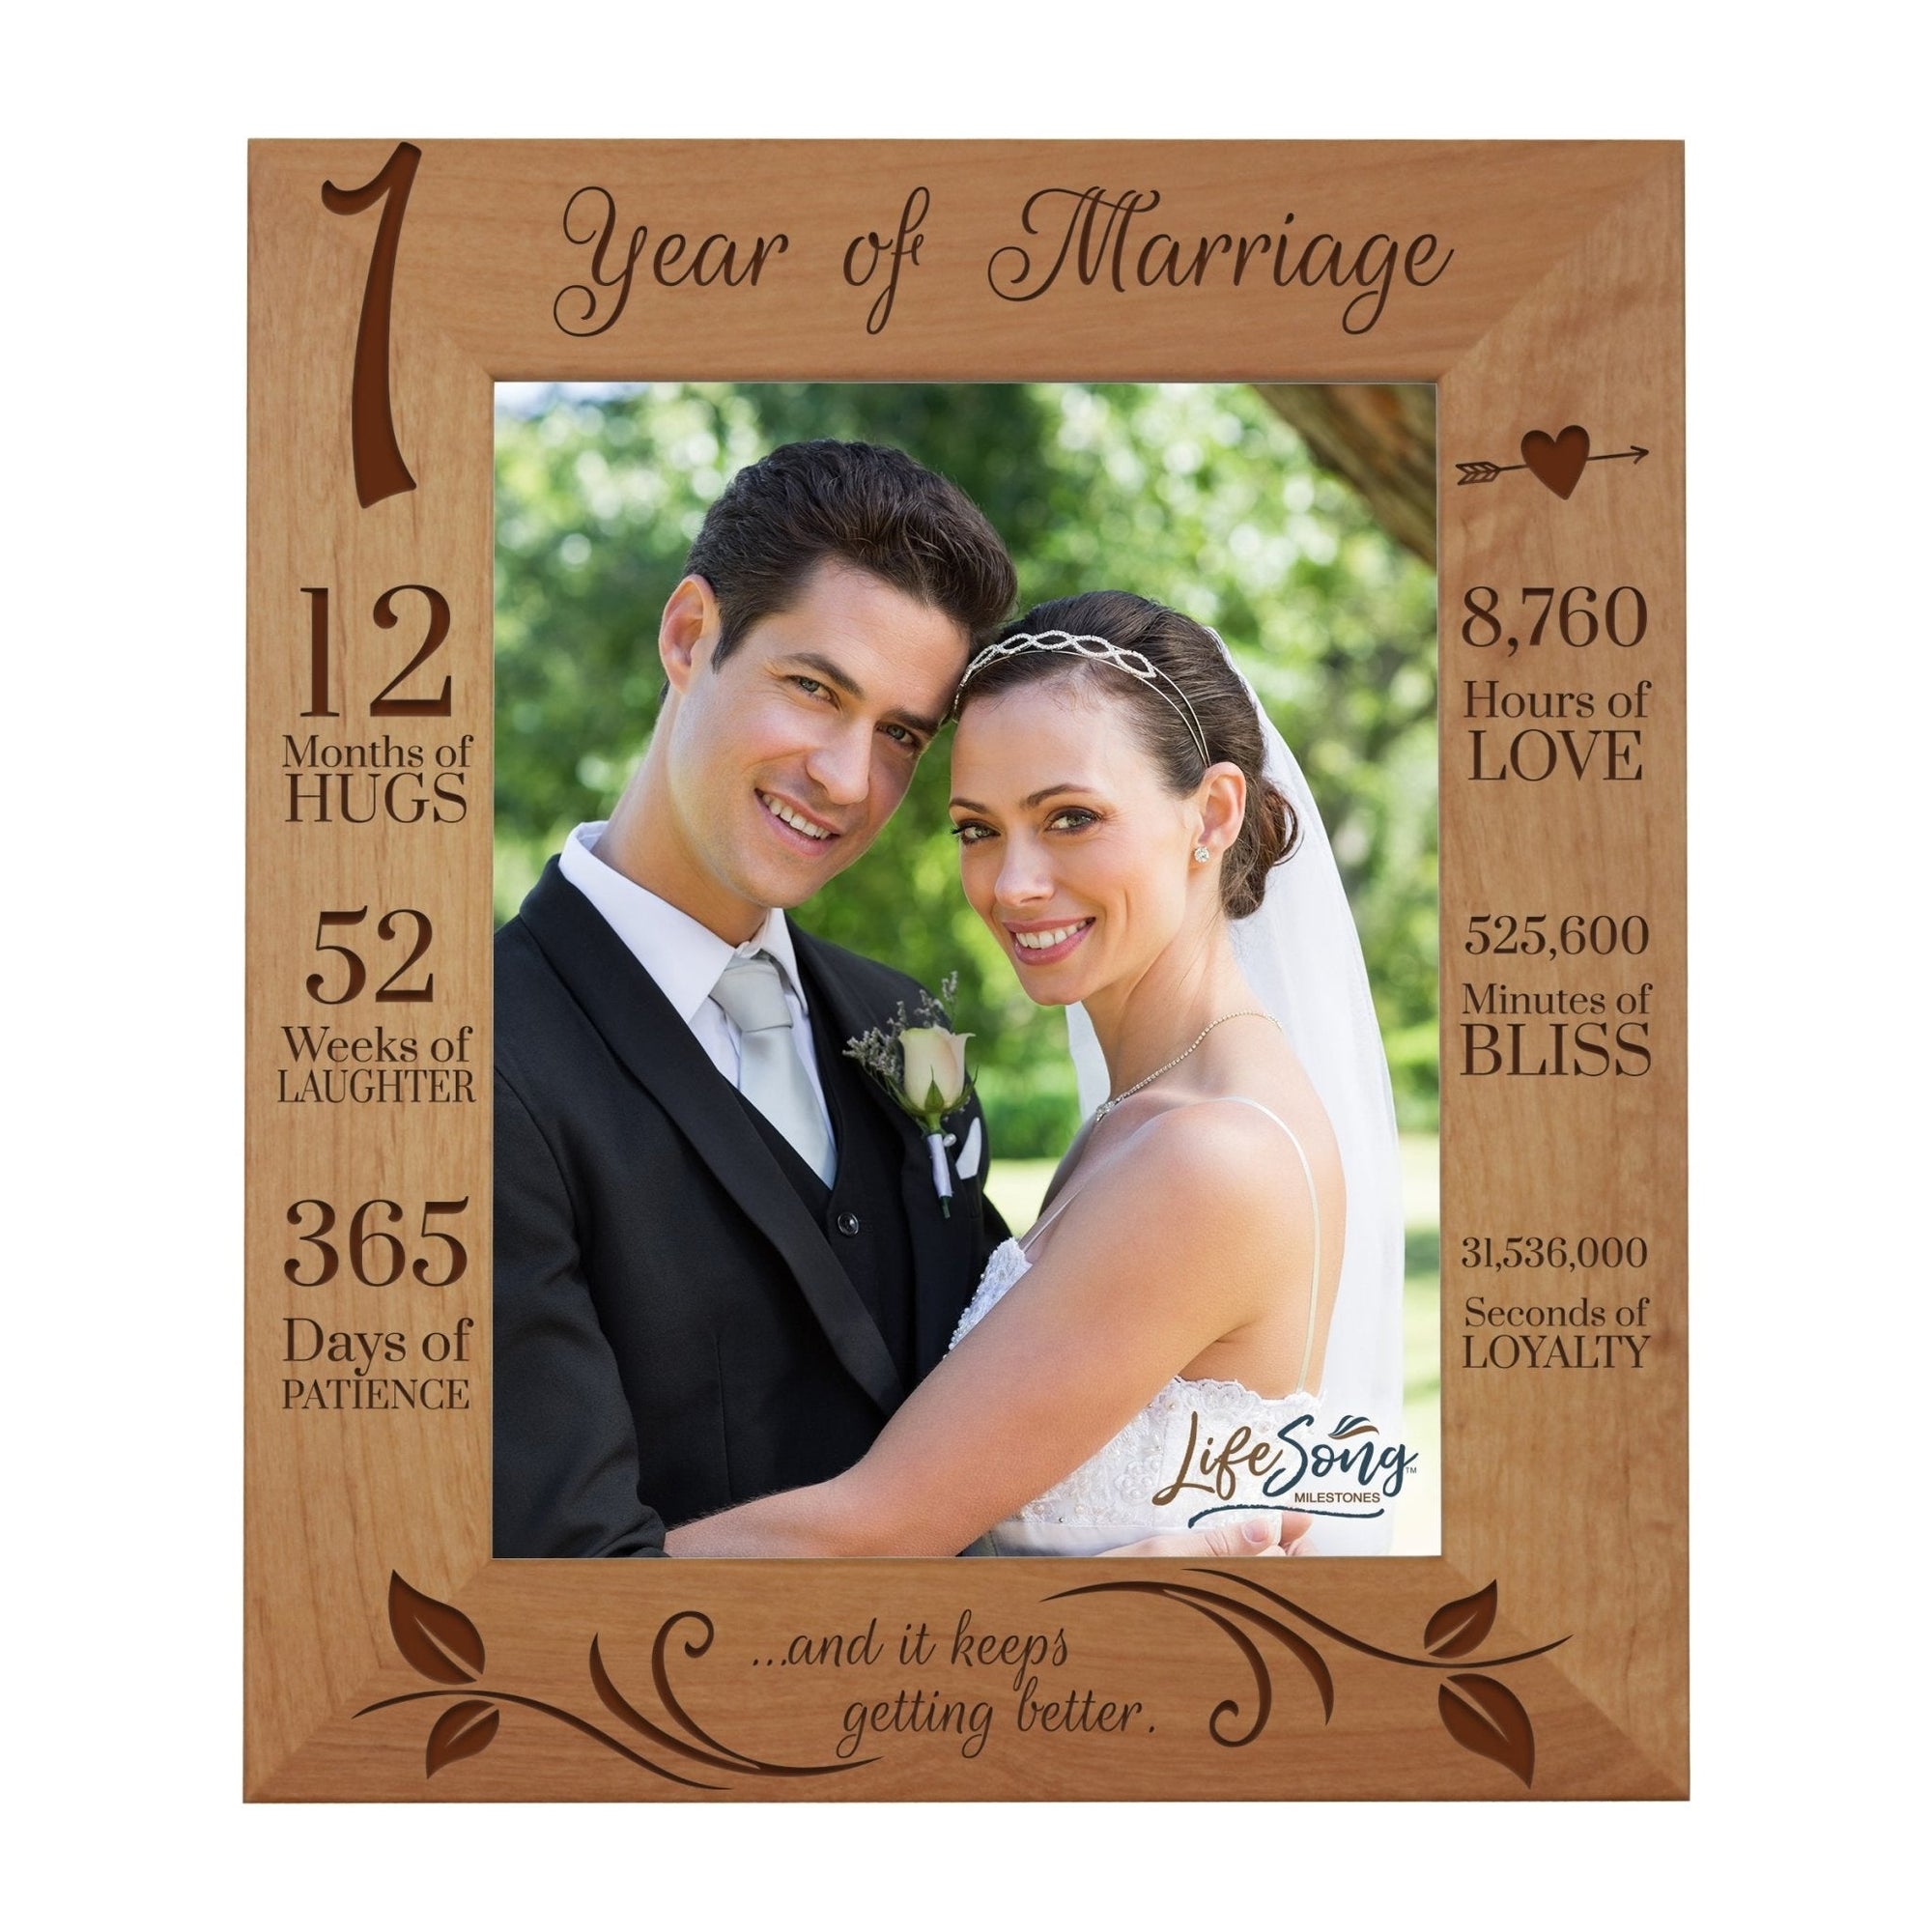 Couples 1st Wedding Anniversary Photo Frame Home Decor Gift Ideas - Keeps Getting Better - LifeSong Milestones